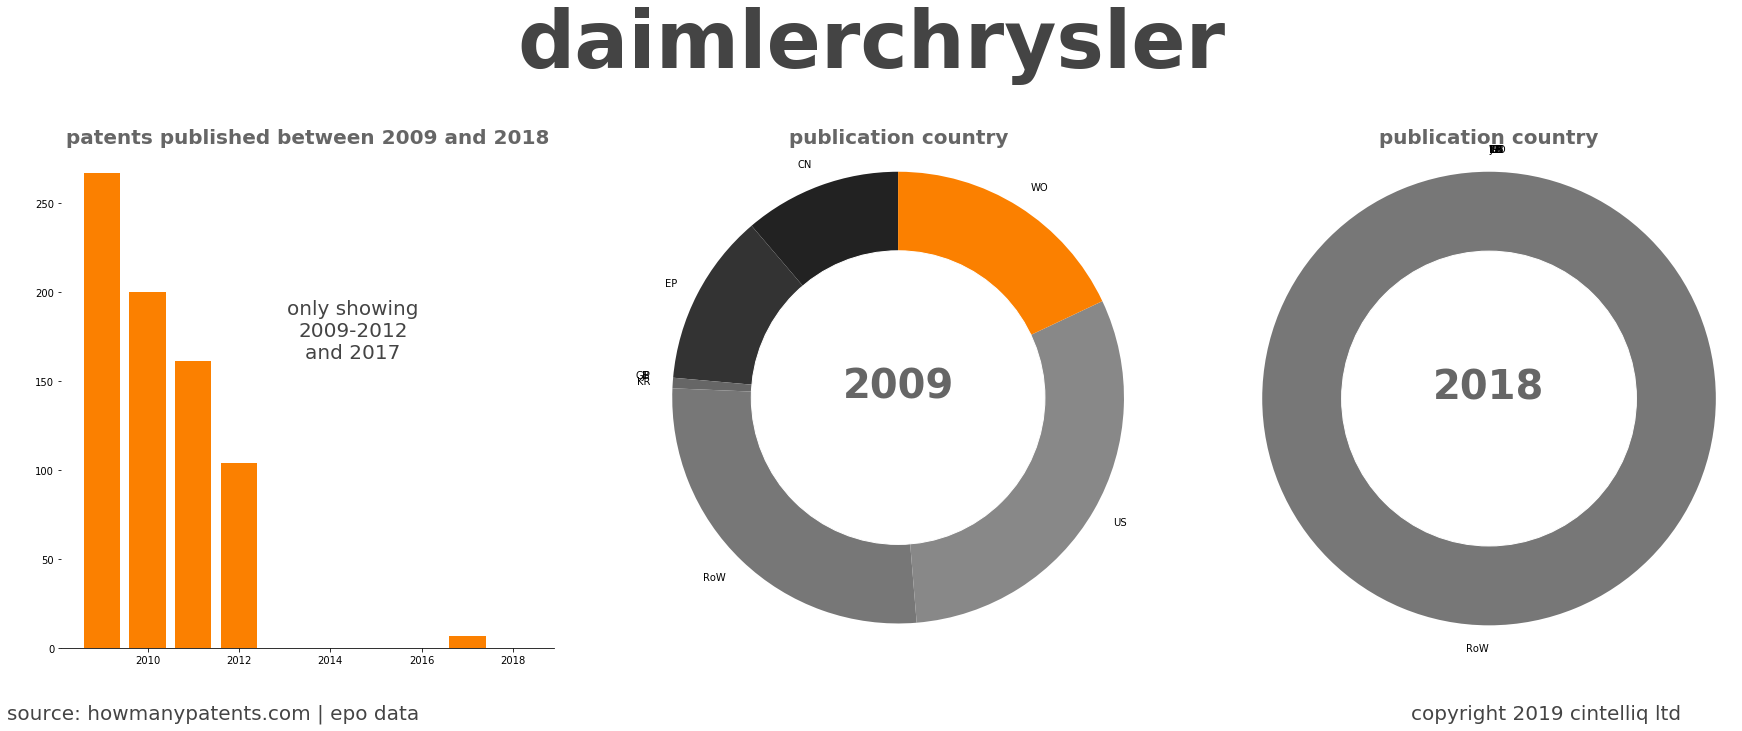 summary of patents for Daimlerchrysler